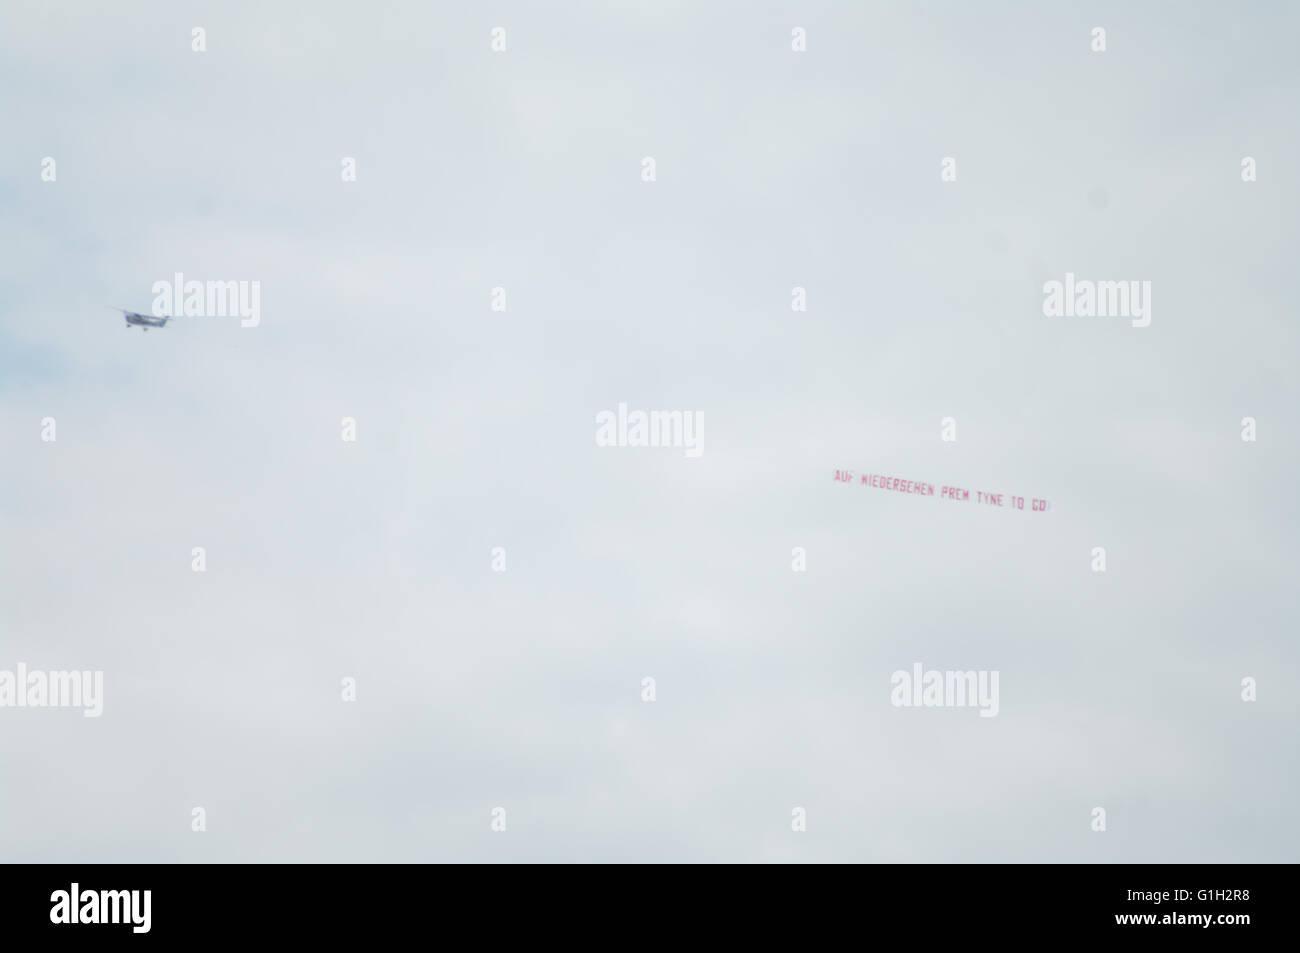 Newcastle upon Tyne, UK, 15 May 2016. A plane pulling a banner saying “Auf Wiedersehen Prem Tyne to Go” flies around St James Park as Newcastle play their final match of the 2015/2016 season. They were relegated to the Championship prior to this match. The banner was created by Air Ads and paid for by Sunderland fans with surplus funds being donated to charity. Credit:  Colin Edwards / Alamy Live News Stock Photo